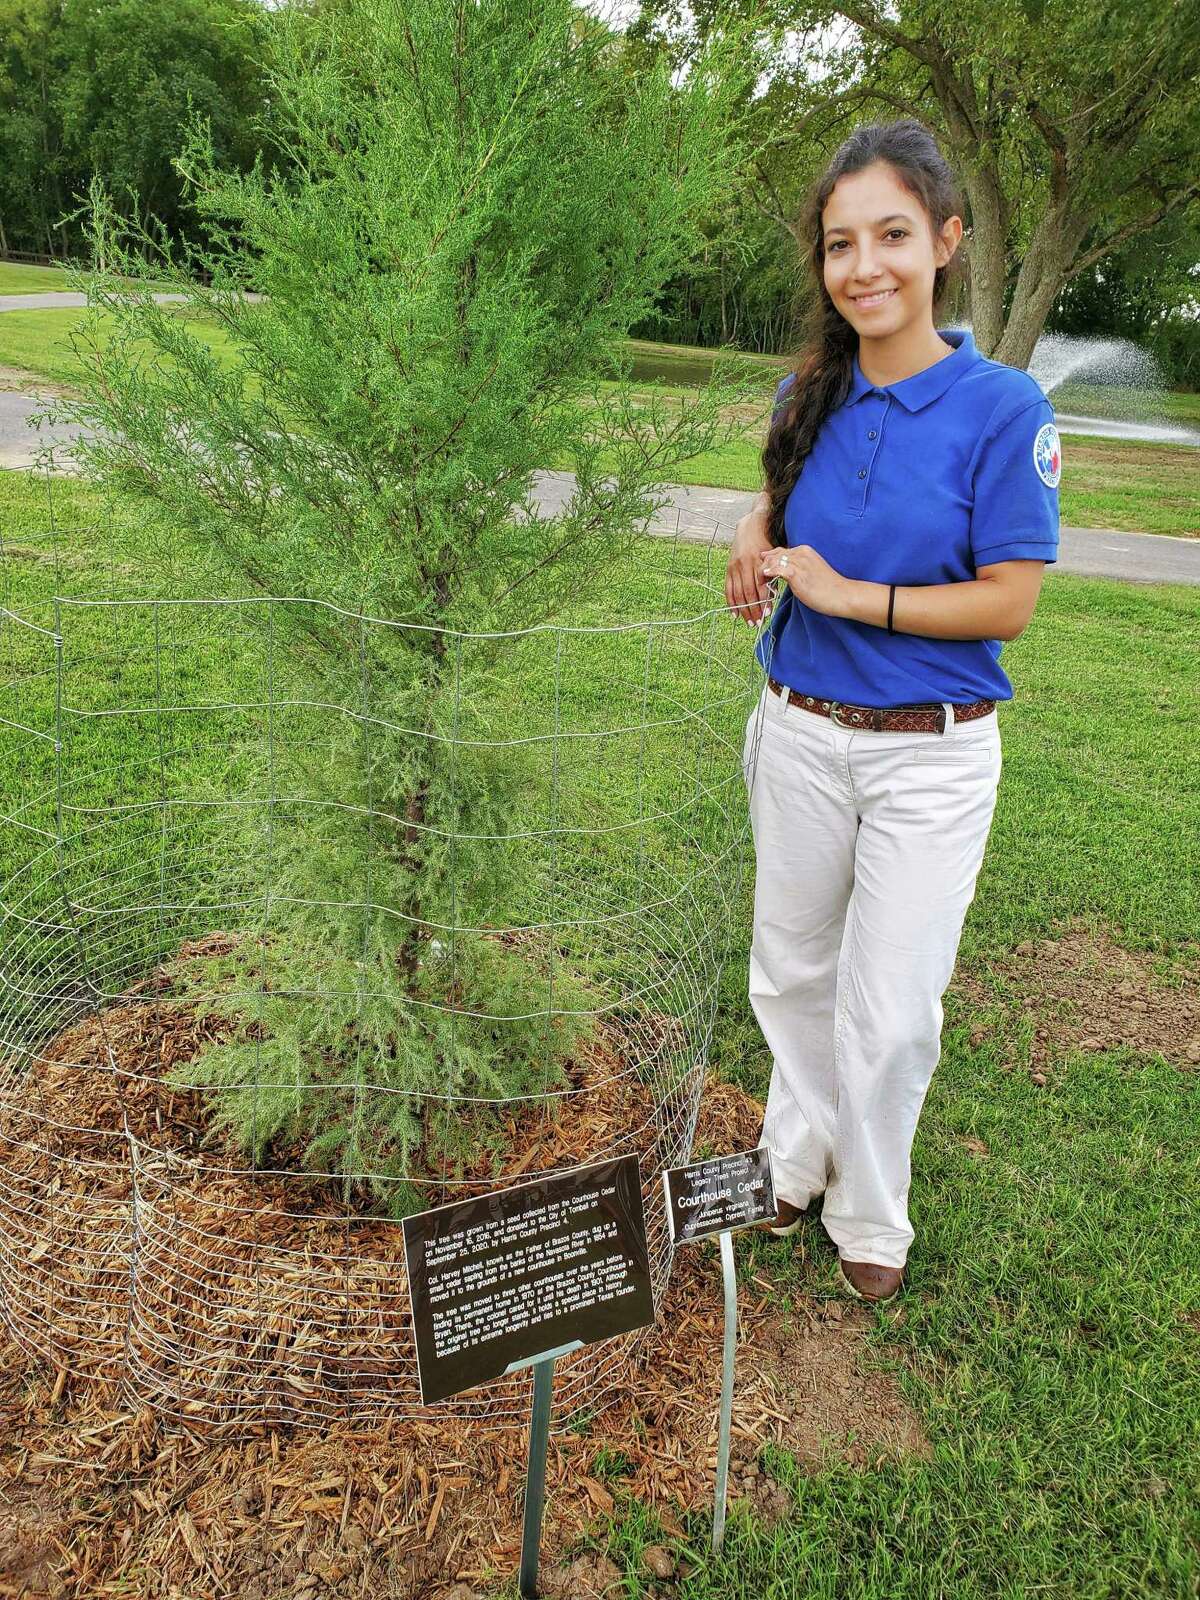 Harris County Arborist Laura Medick with a legacy tree planted at Broussard Park.